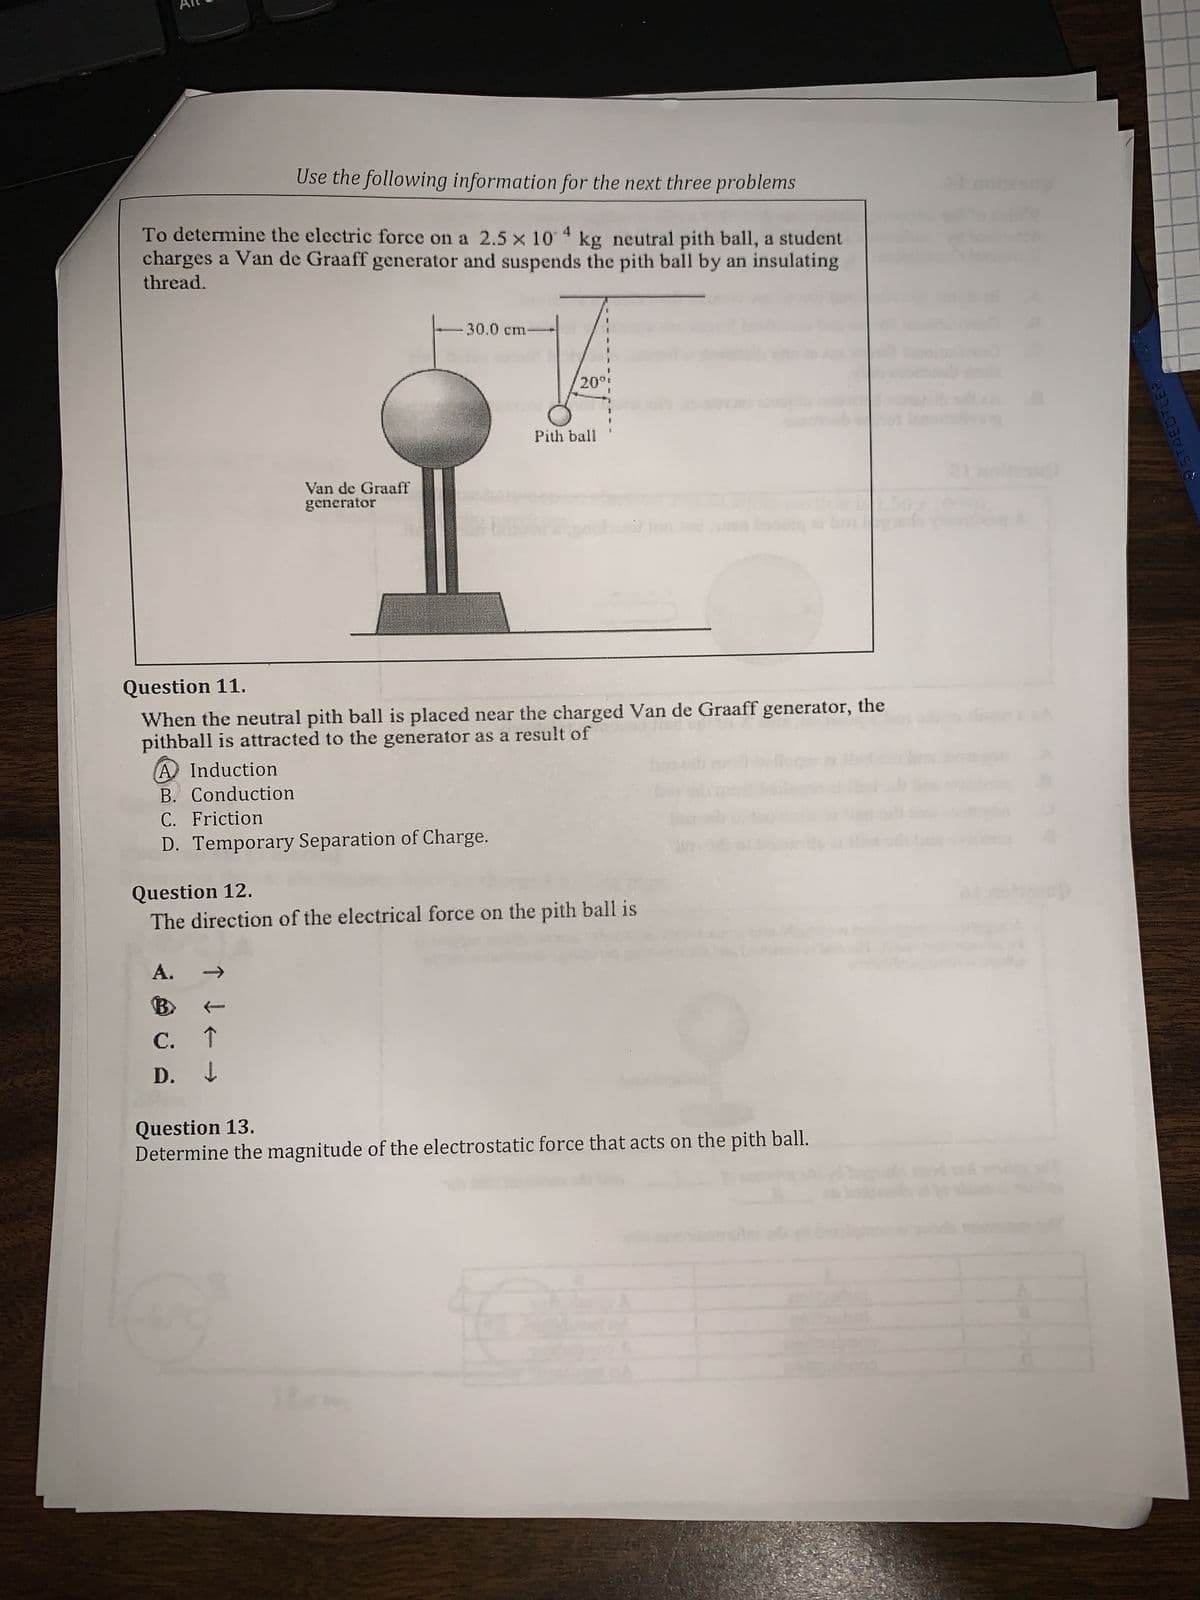 Use the following information for the next three problems
To determine the electric force on a 2.5 x 104 kg neutral pith ball, a student
charges a Van de Graaff generator and suspends the pith ball by an insulating
thread.
Van de Graaff
generator
A Induction
B. Conduction
C. Friction
D. Temporary Separation of Charge.
↓e
-30.0 cm-
C.
↑
D. ↓
Question 11.
90 m
When the neutral pith ball is placed near the charged Van de Graaff generator, the
pithball is attracted to the generator as a result of
Question 12.
The direction of the electrical force on the pith ball is
A.
20º;
Item
Pith ball
Question 13.
Determine the magnitude of the electrostatic force that acts on the pith ball.
46
1.50
STAEDTLER